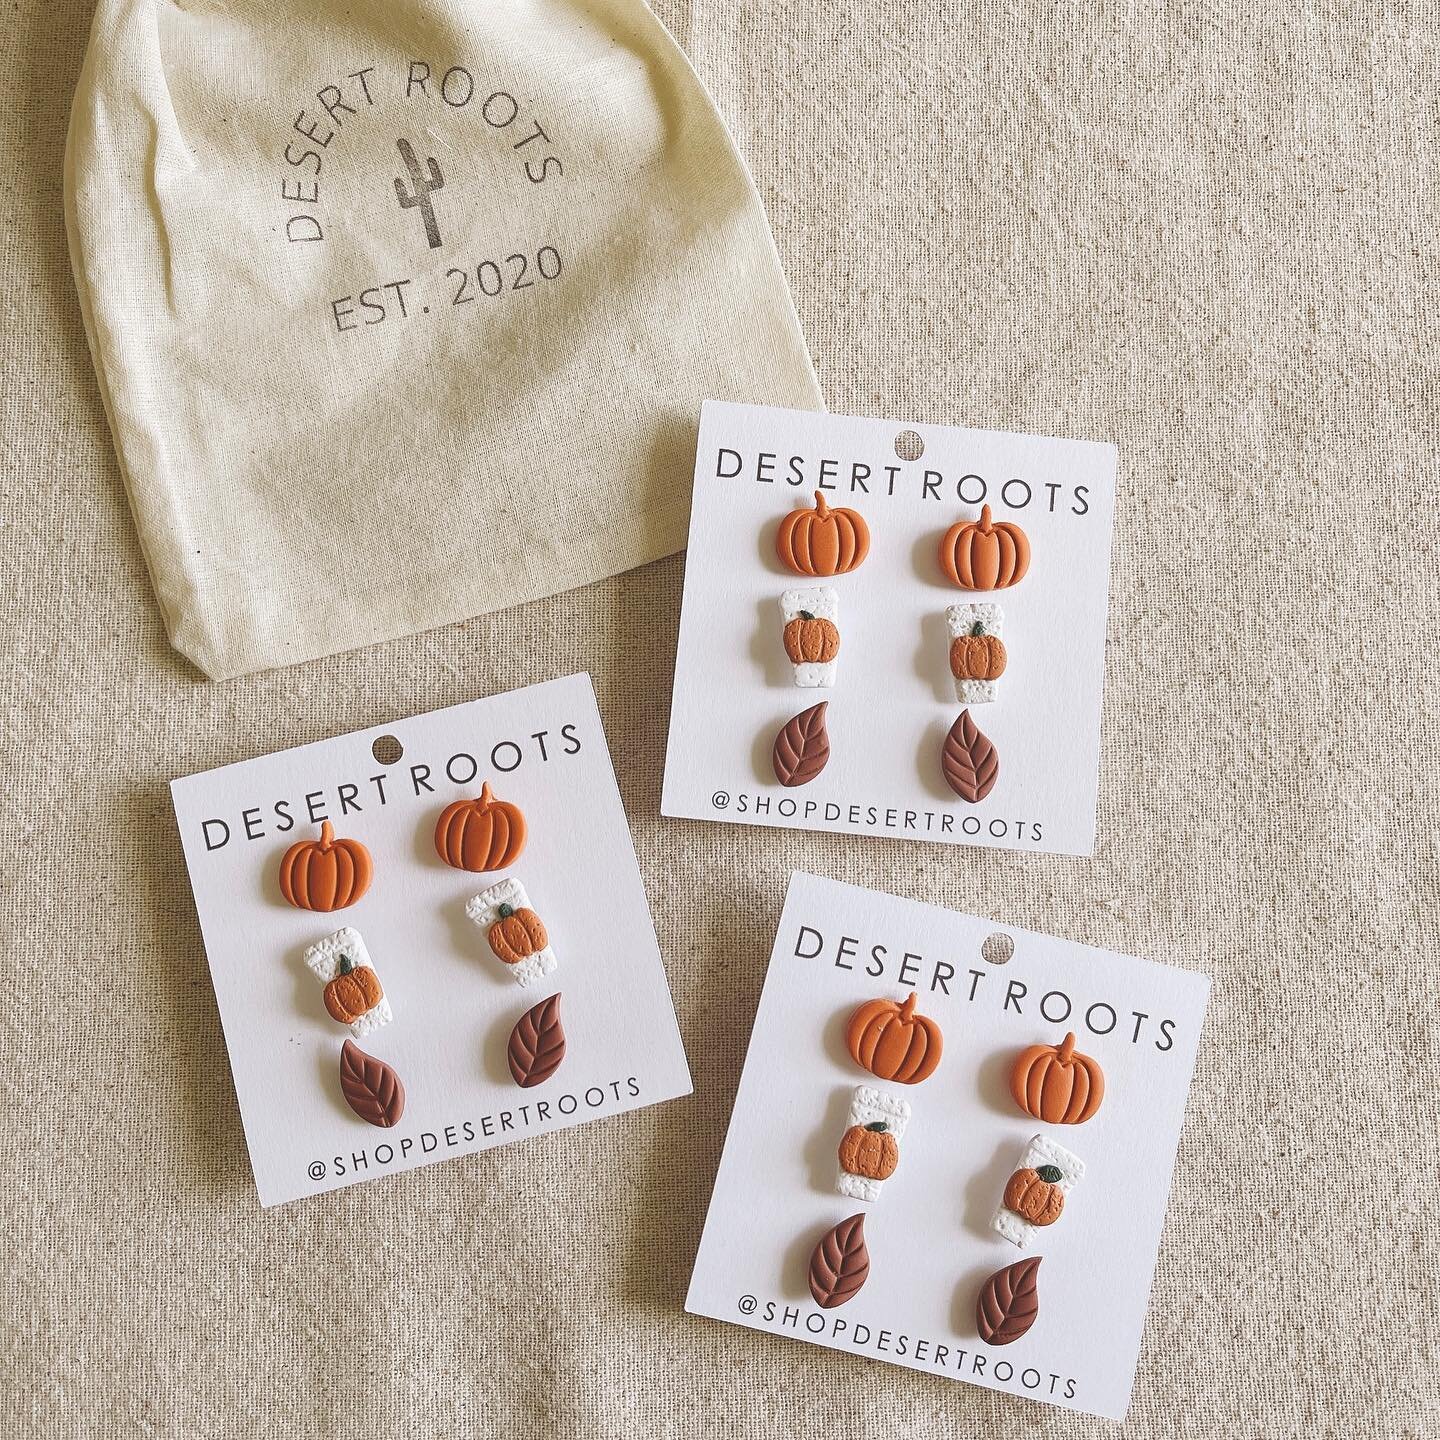 fall stud packs 🍂 if you had to choose one, would you say you&rsquo;re team-
1. PSL ☕️
2. Jack o lantern 🎃
3. Classic 👻
4. Pumpkin 🍂

#spooky #spookyearrings #halloween #halloweendecor #halloweenearrings #fall #fallearrings #psl #ghost #ghostearr